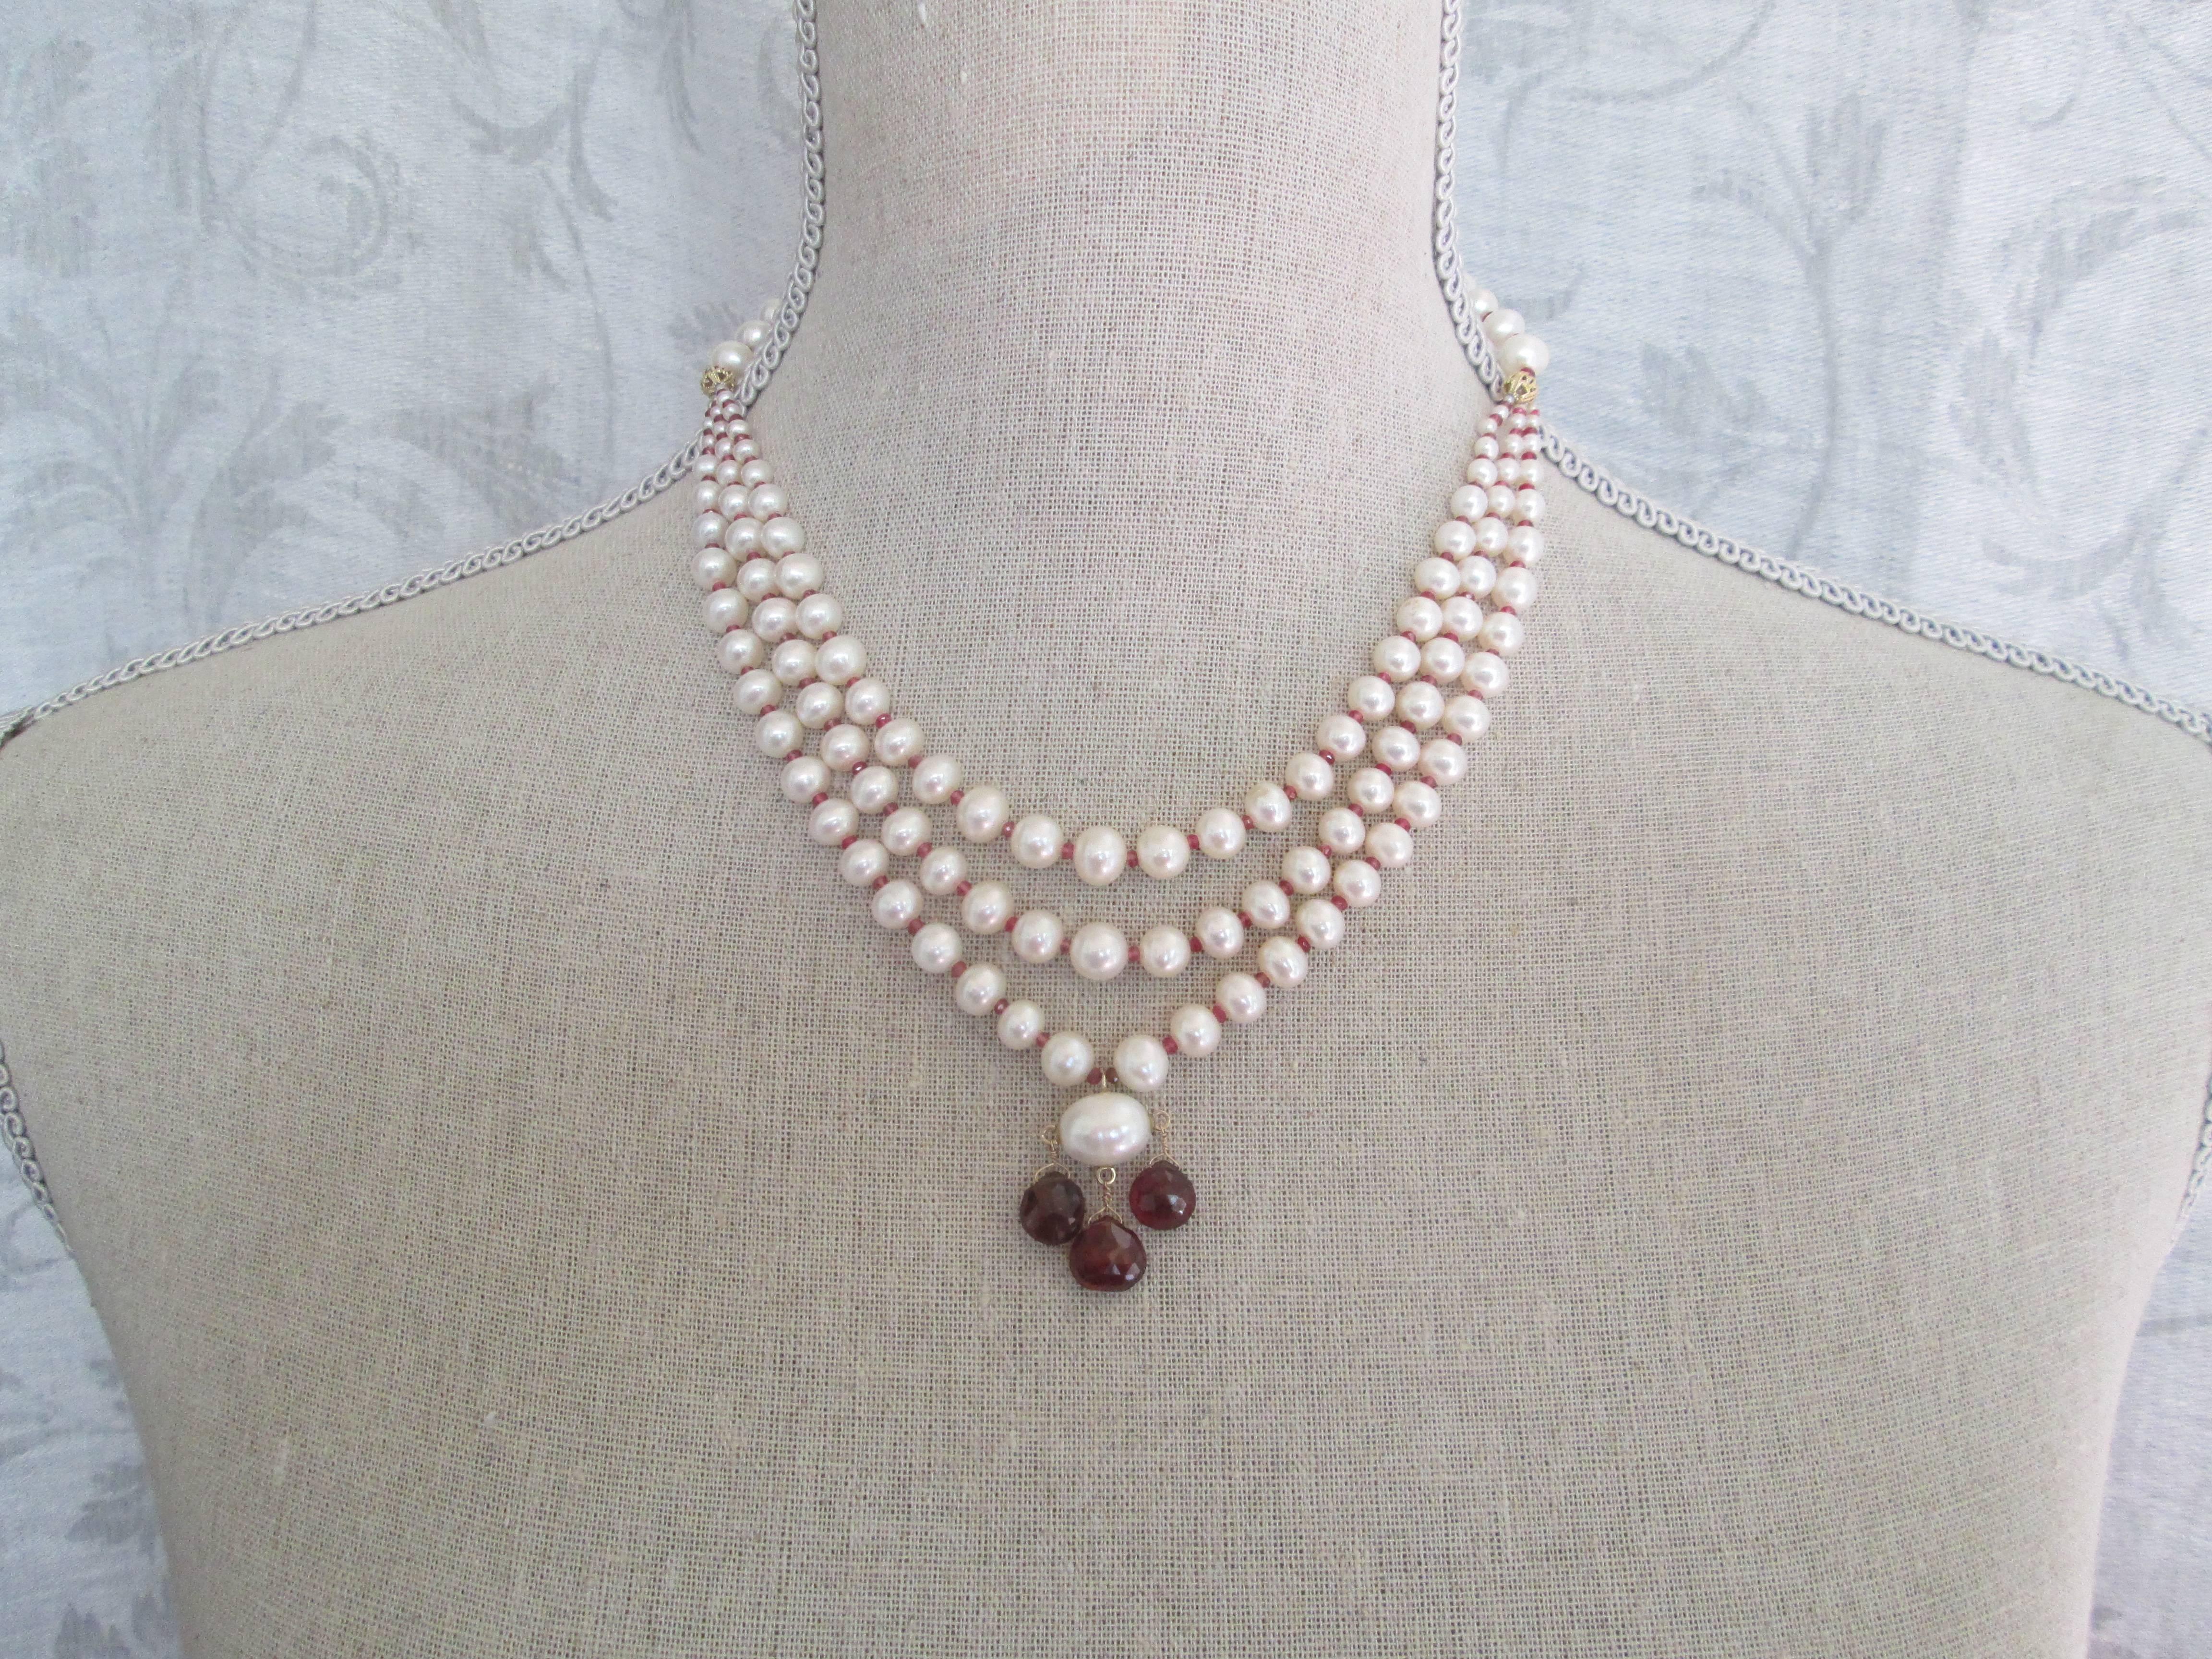 Artist Marina J. 3 Strands of Graduated Pearl Necklace with Garnet & 14k Yellow Gold